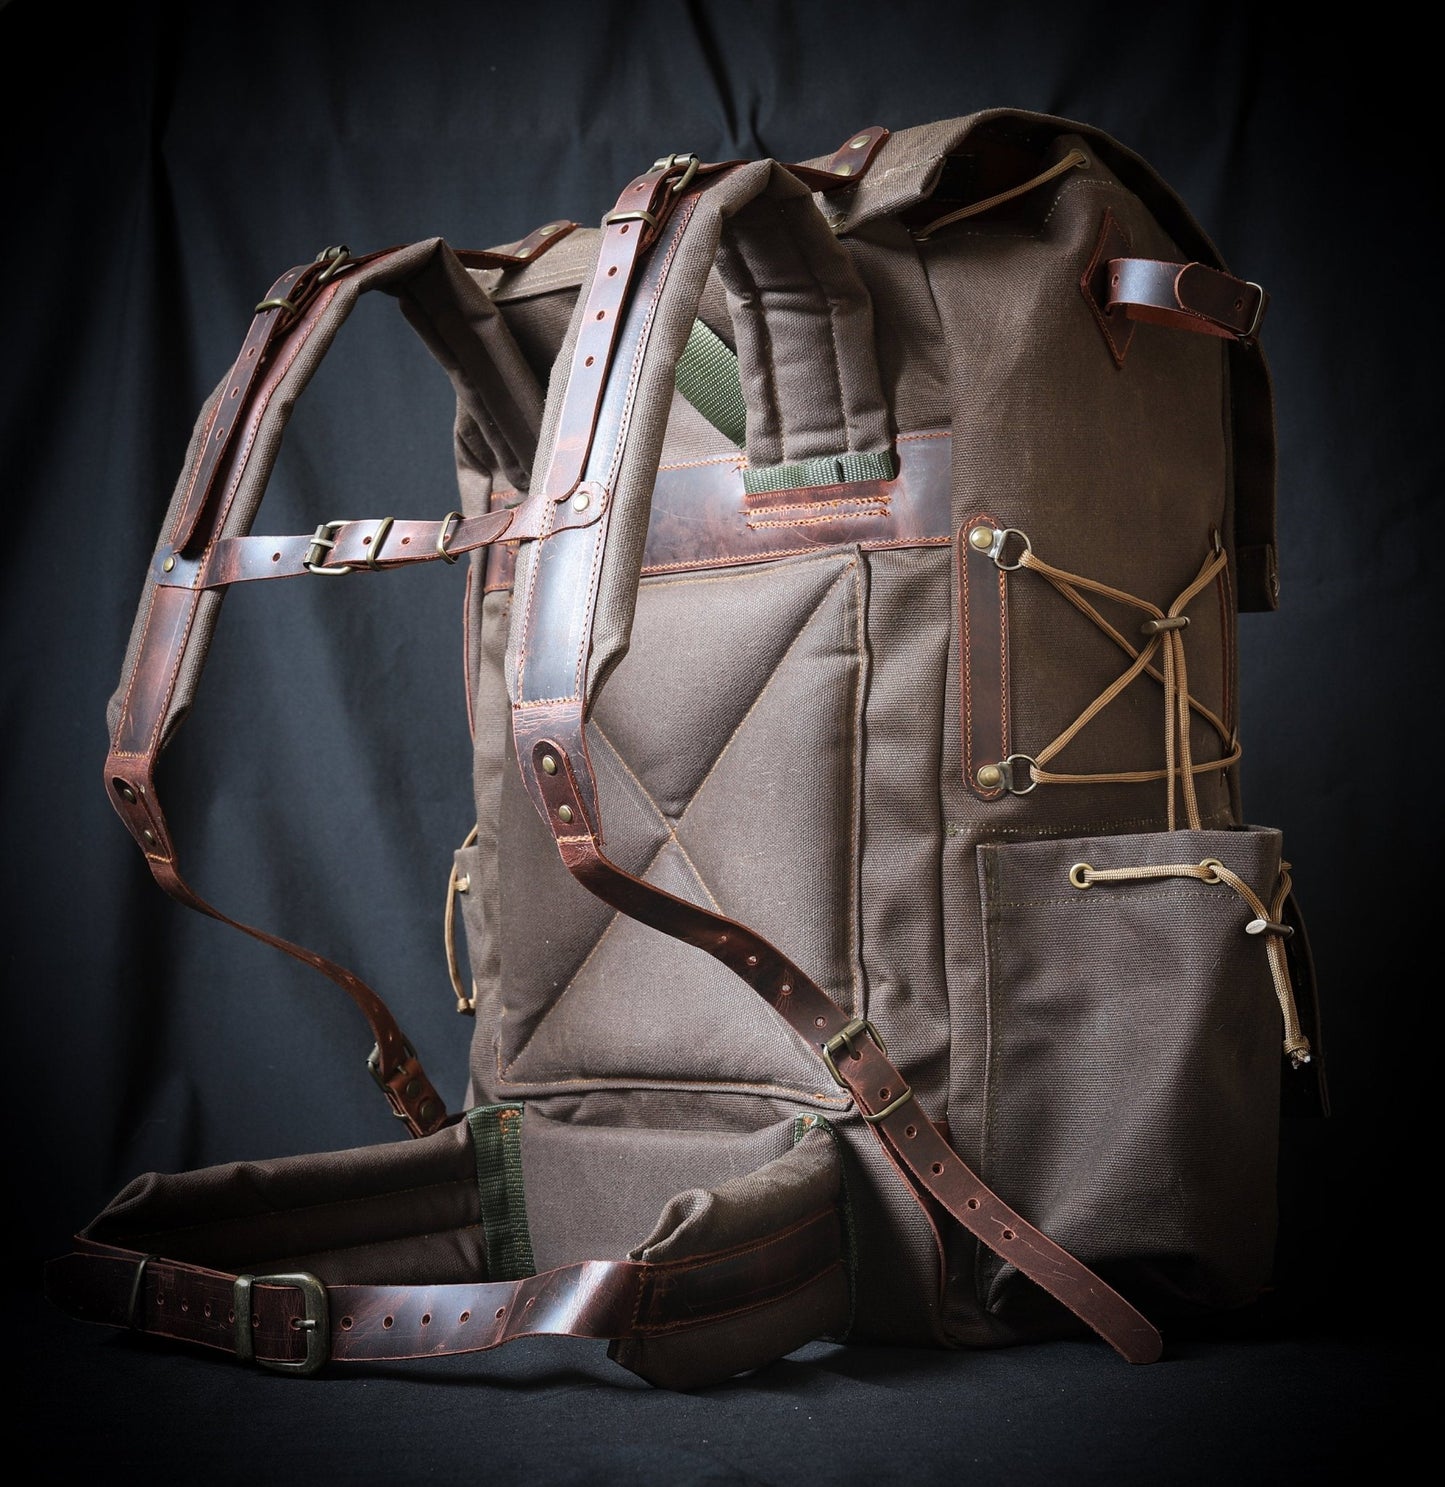 30 to 80 Liter Camping Backpack Handmade Leather and Waxed Canvas, Colors: Brown, Green, Black unlimited personalization  99percenthandmade Brown 30 Liters 